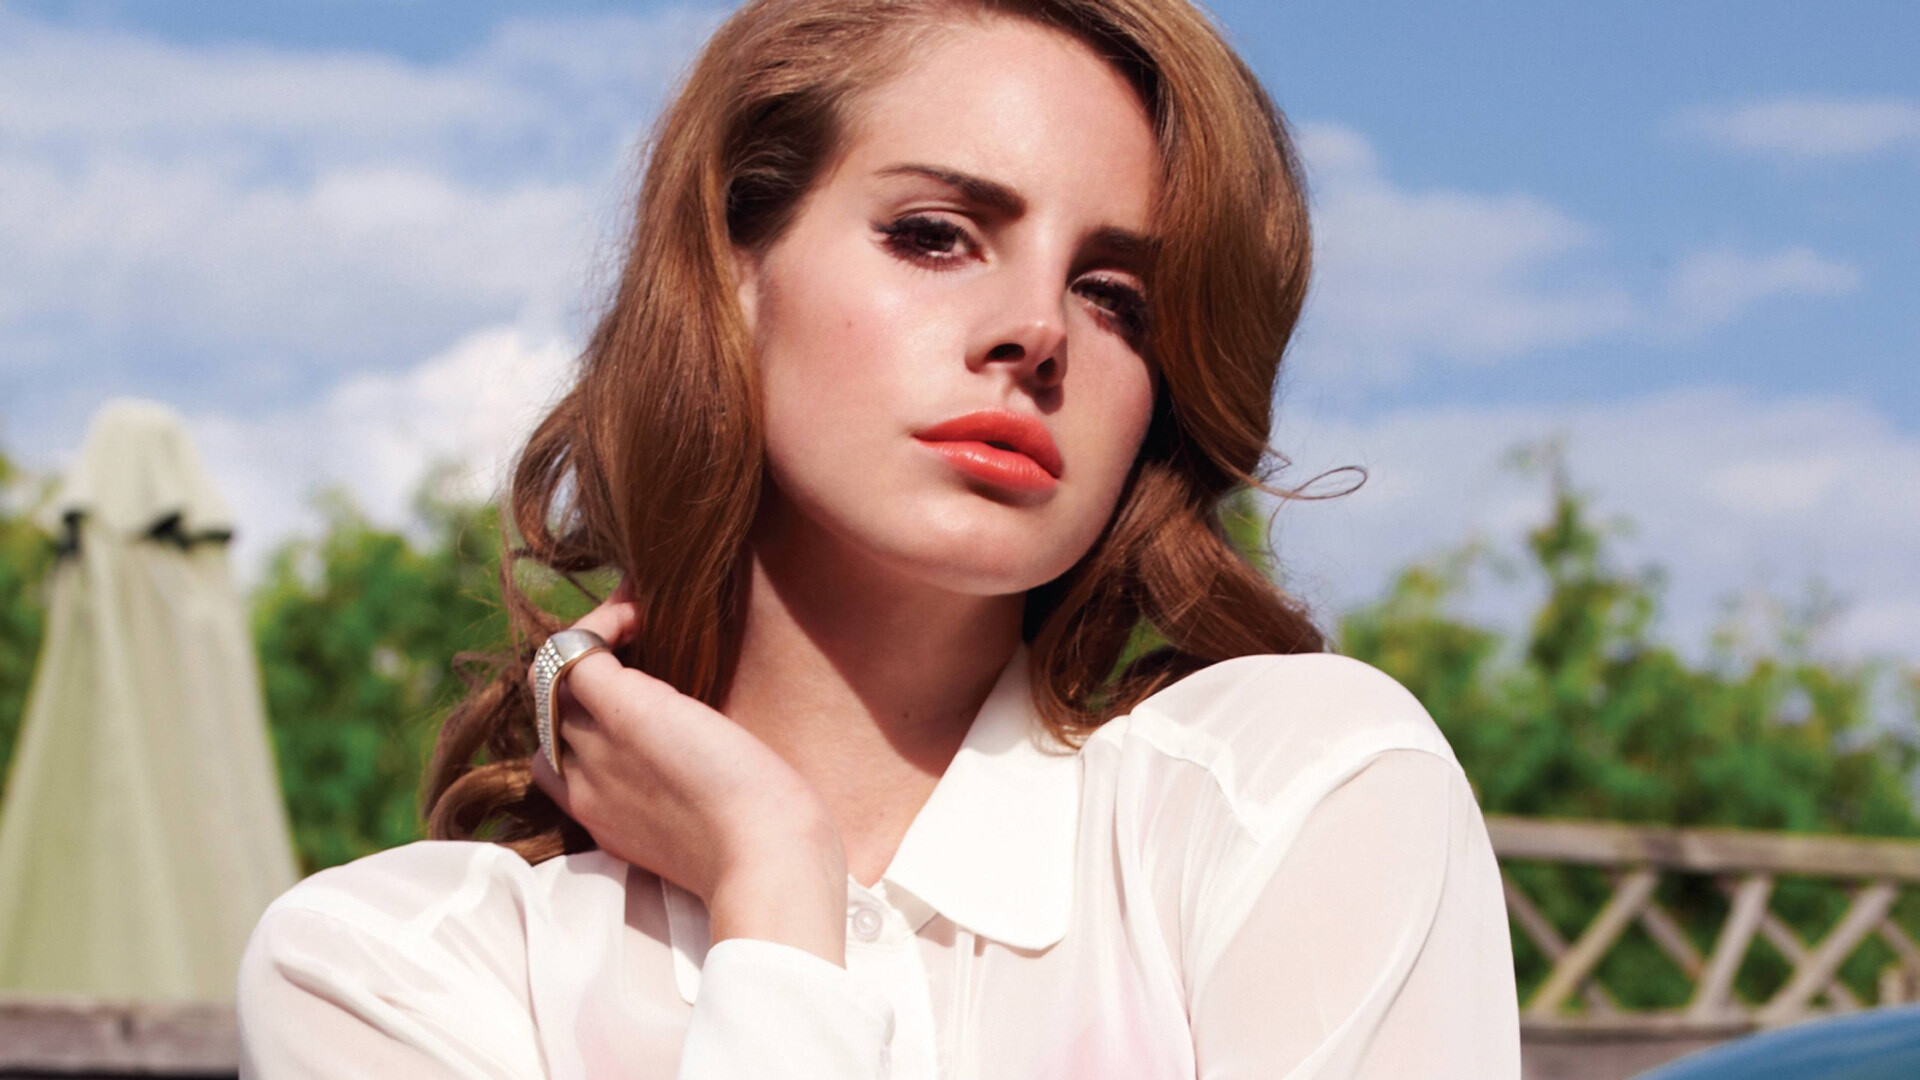 Lana Del Rey: The 'Video Games' singer, Known for her sentimental and highly personal songwriting. 1920x1080 Full HD Wallpaper.